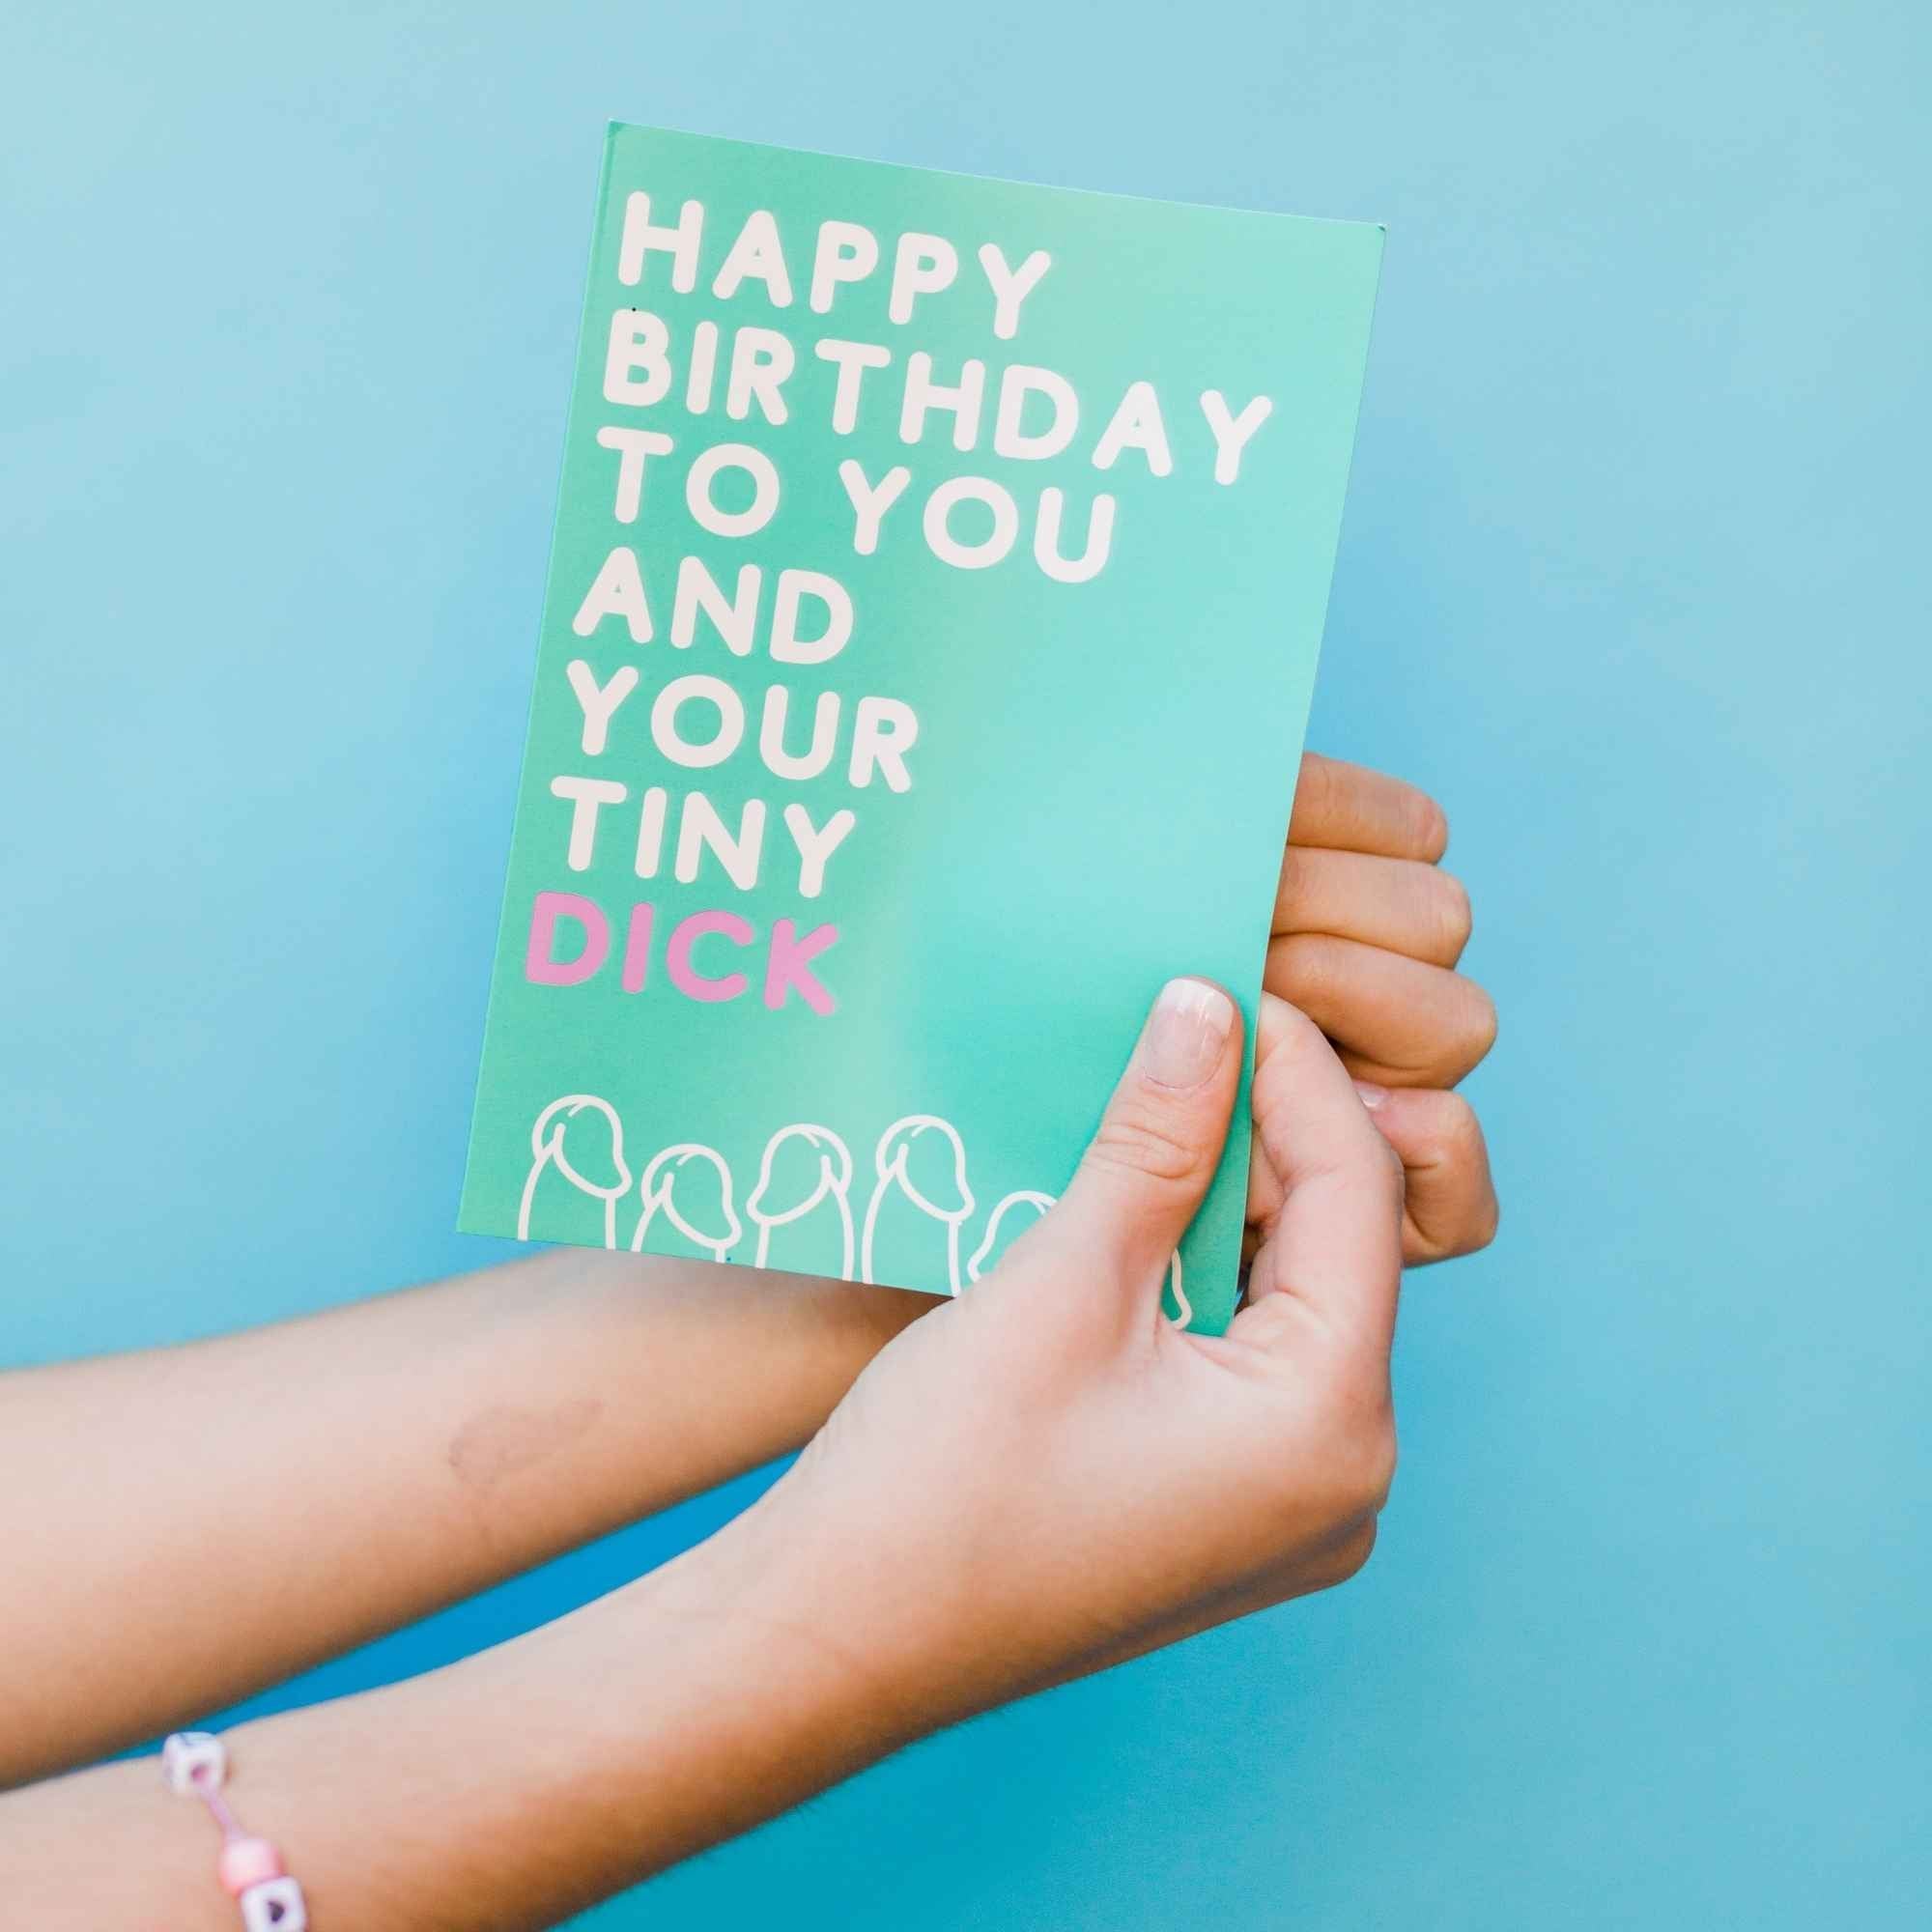 Happy Birthday to You and Your Tiny Penis (NSFW) - Glitter Bomb Card Pranks Anonymous send hilarious pranks and gag gifts to your friends or family.